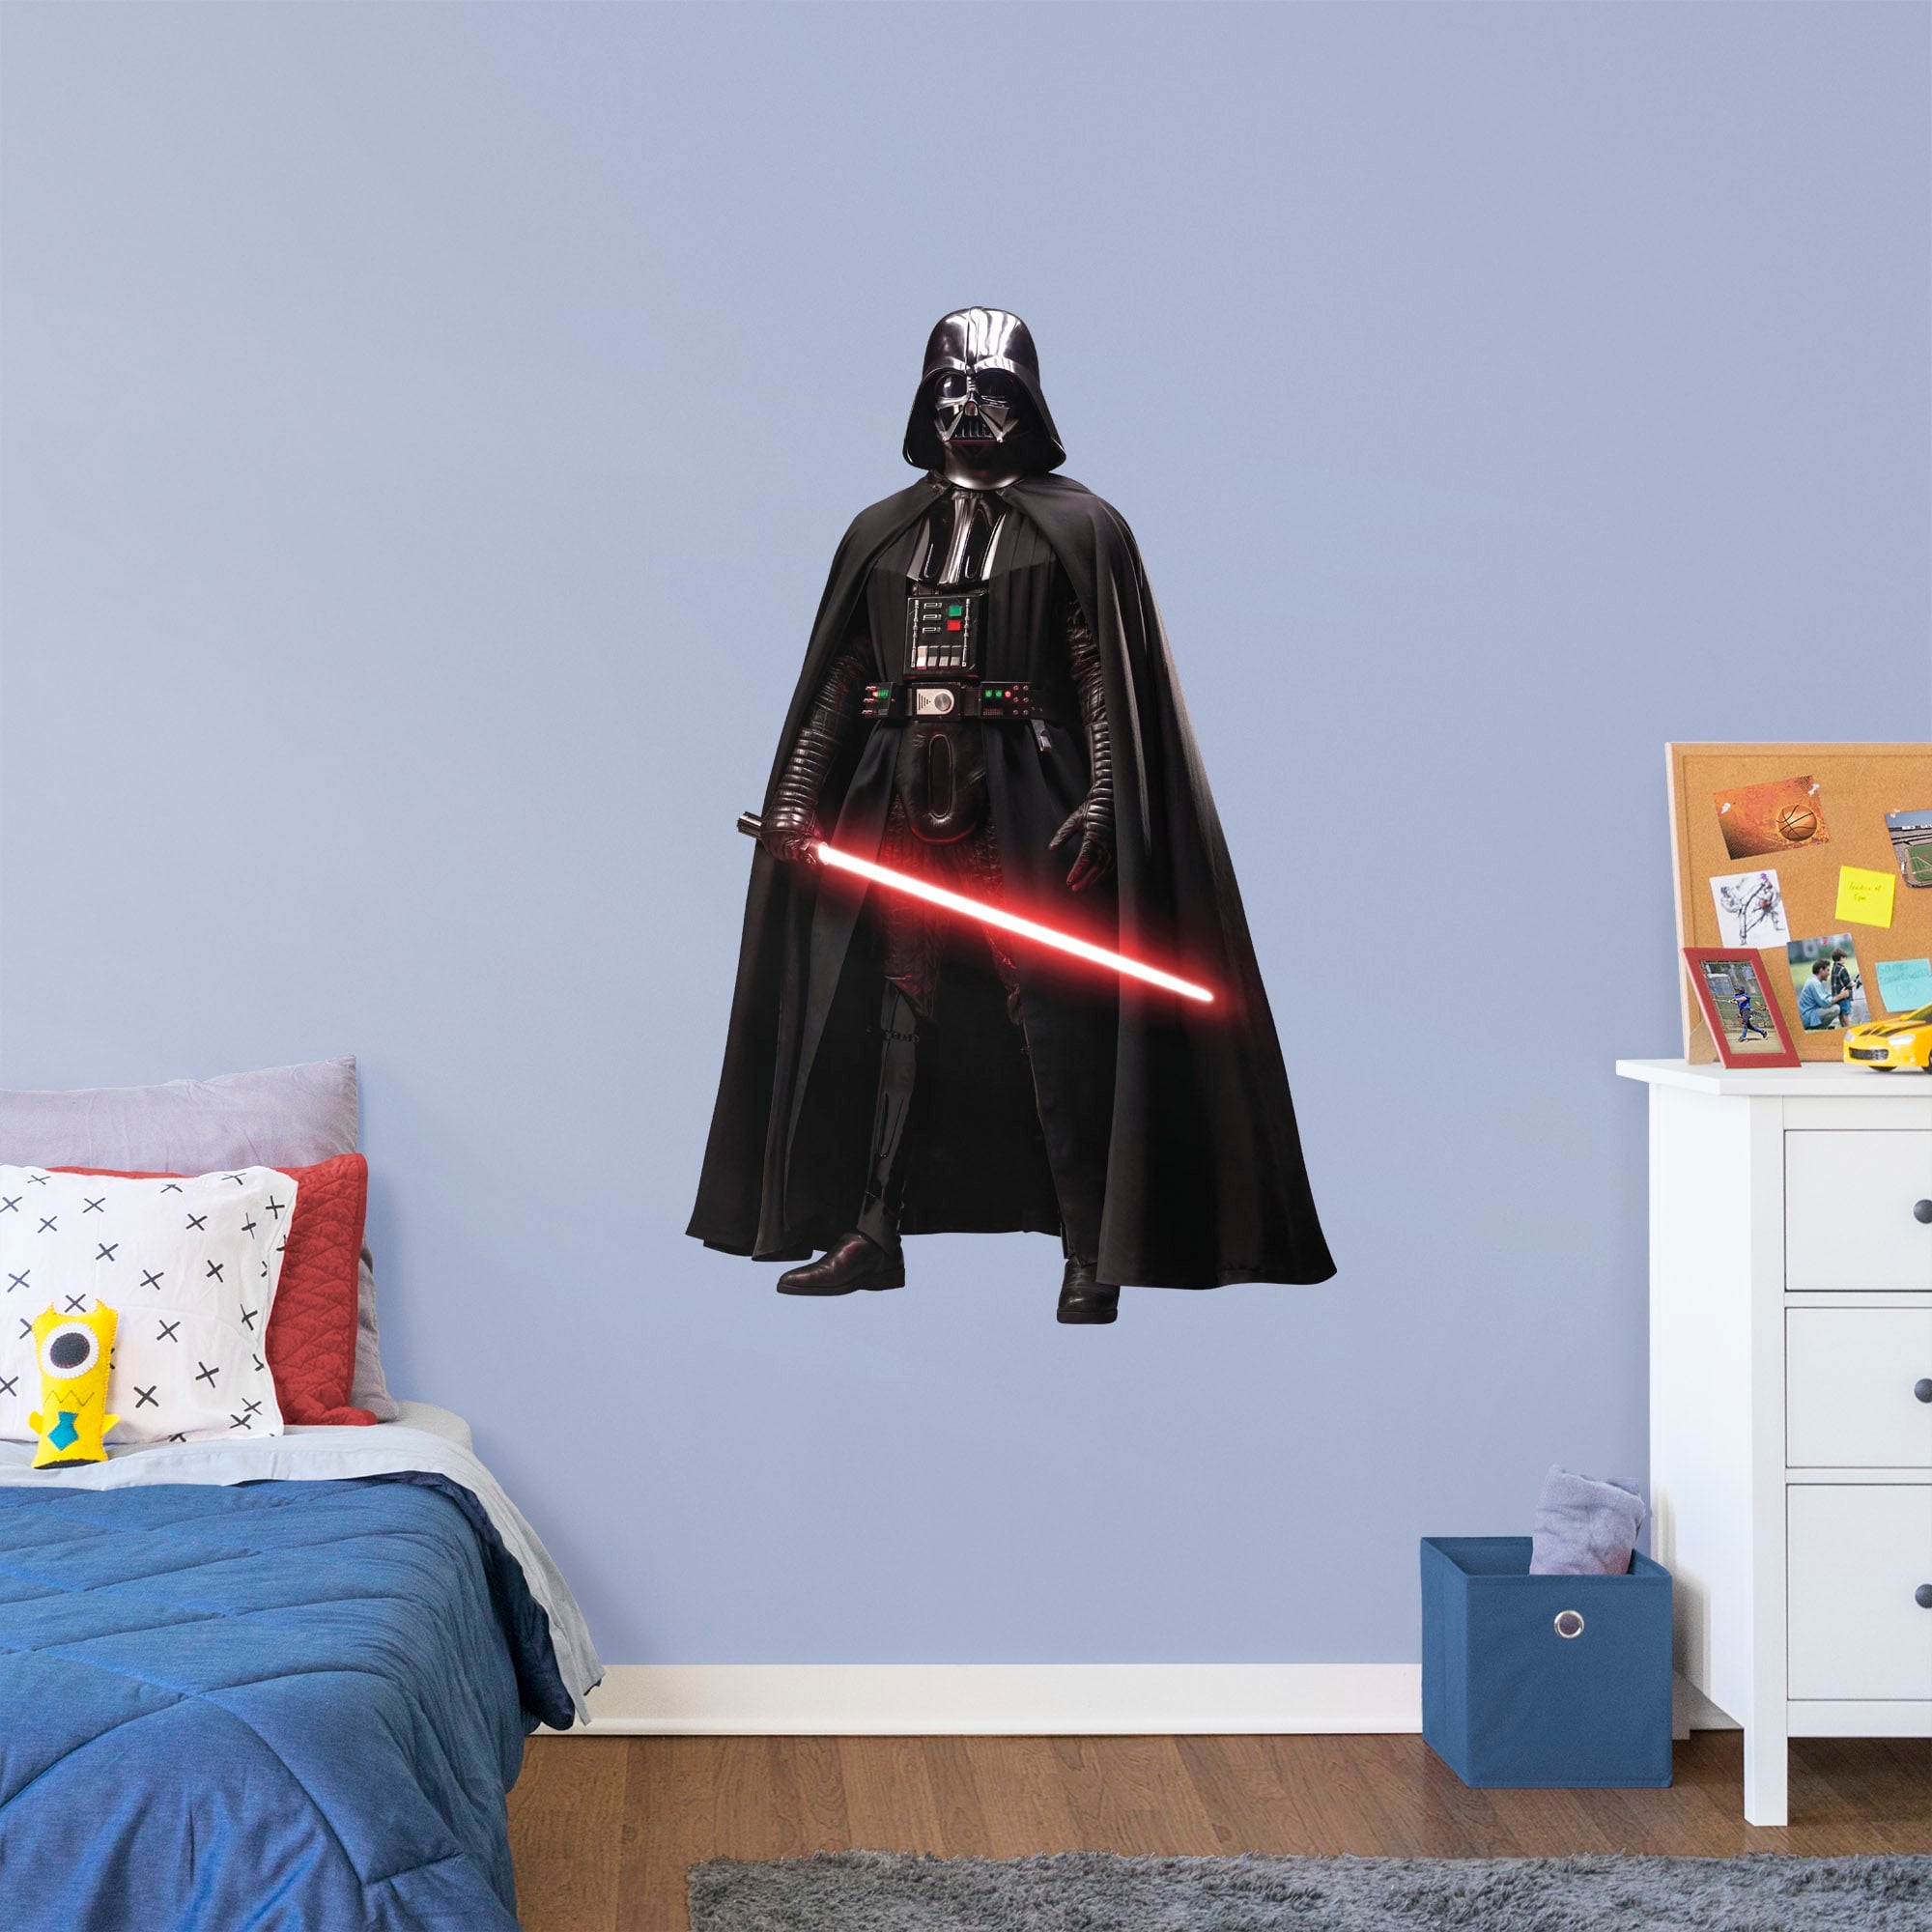 Darth Vader: Dark Lord of the Sith - Officially Licensed Removable Wall Decal Giant Character + 2 Decals (33"W x 51"H) by Fathea